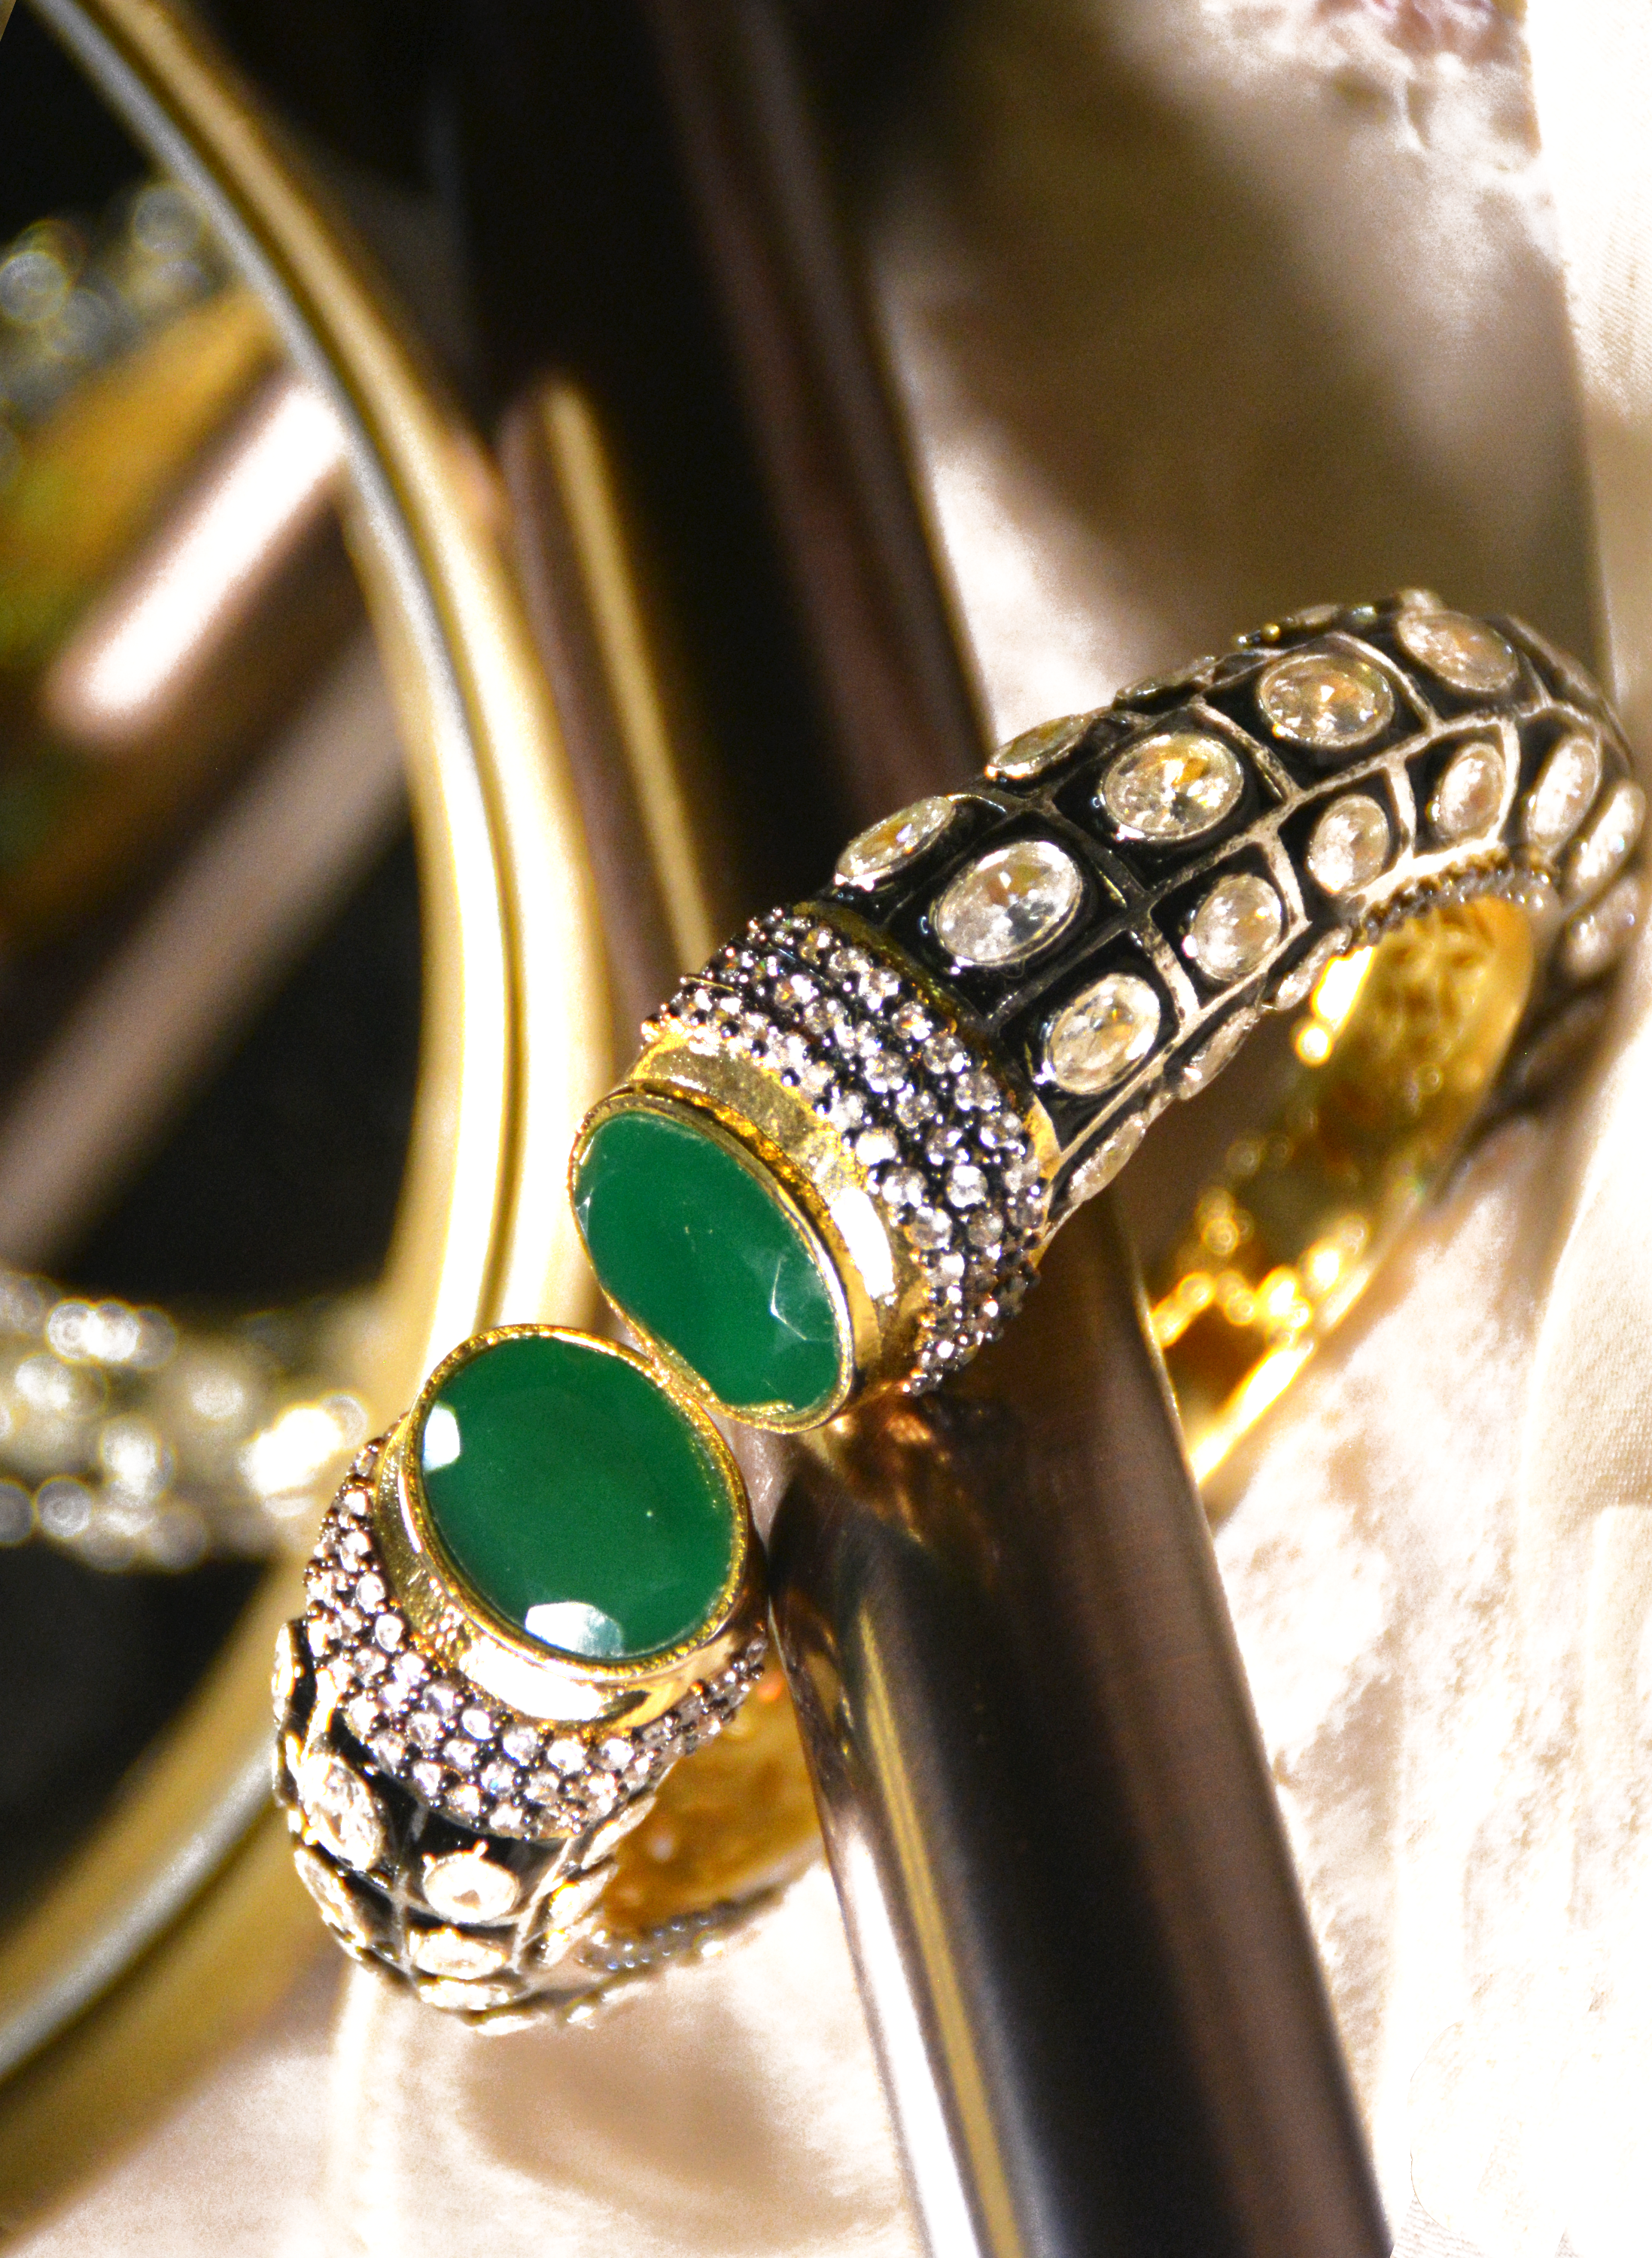 Emerald stone ends on Indian cuff bracelet